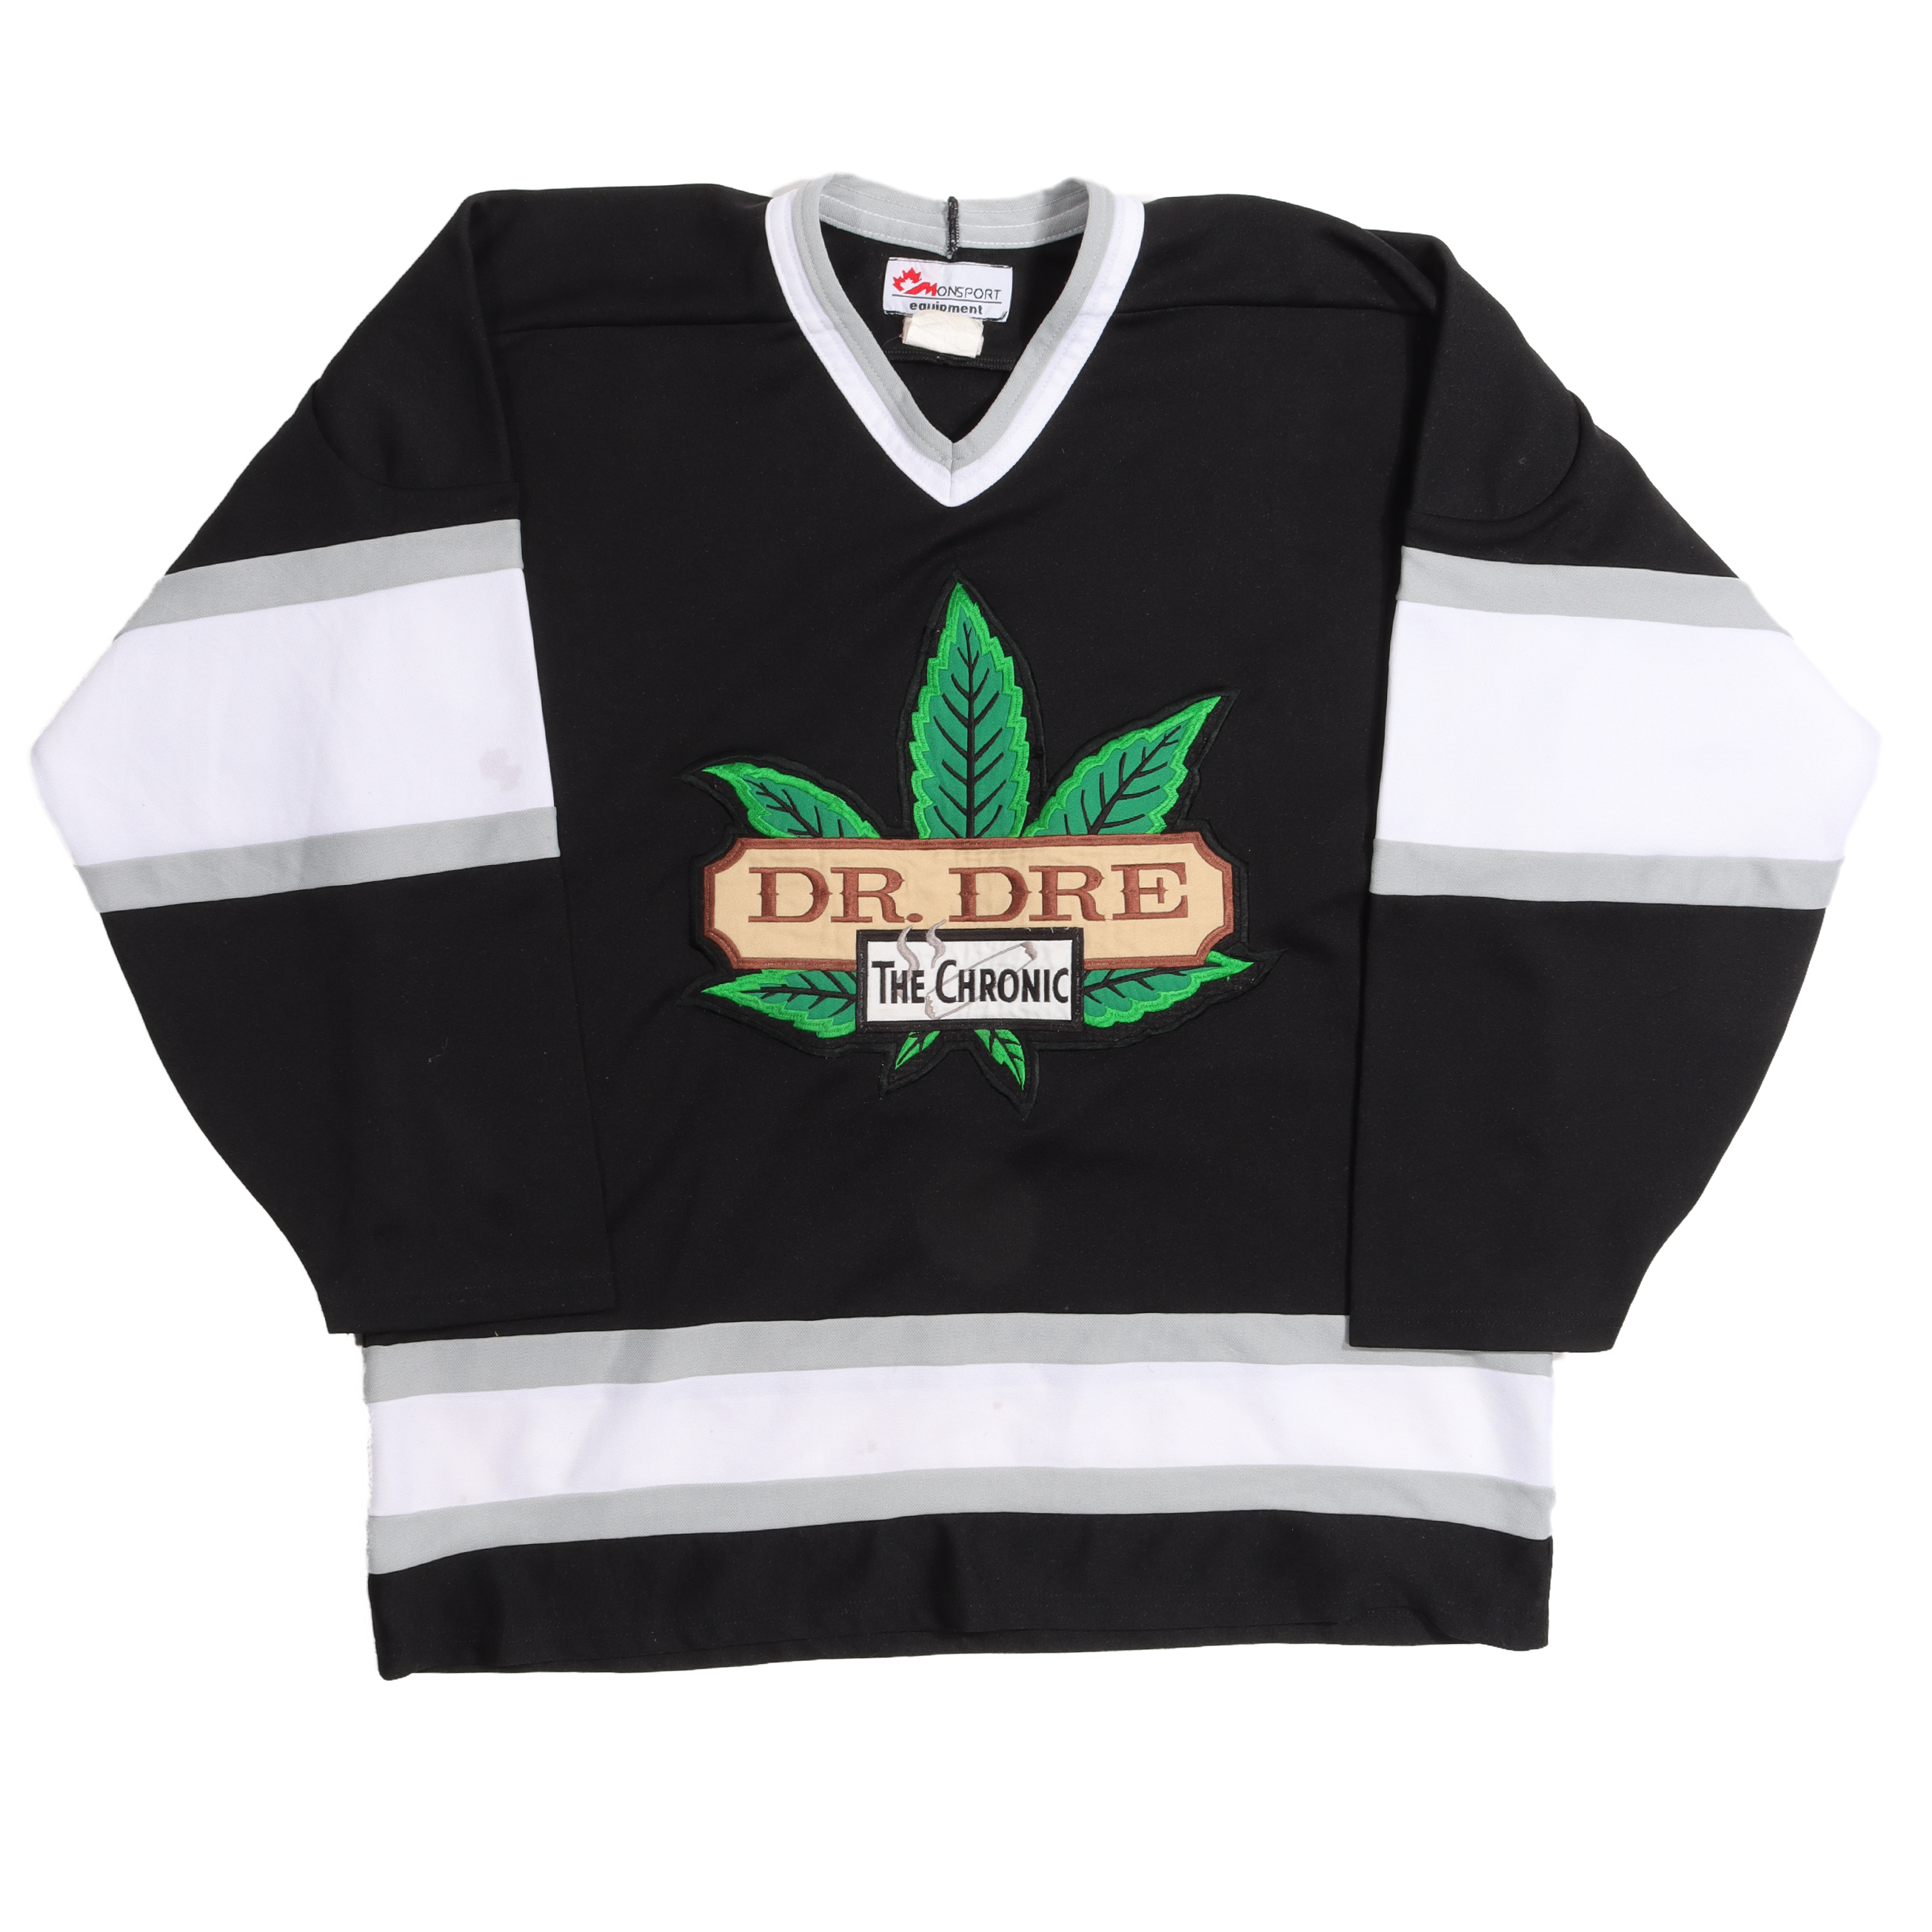 Dr.Dre 'The Chronic' Hockey Jersey